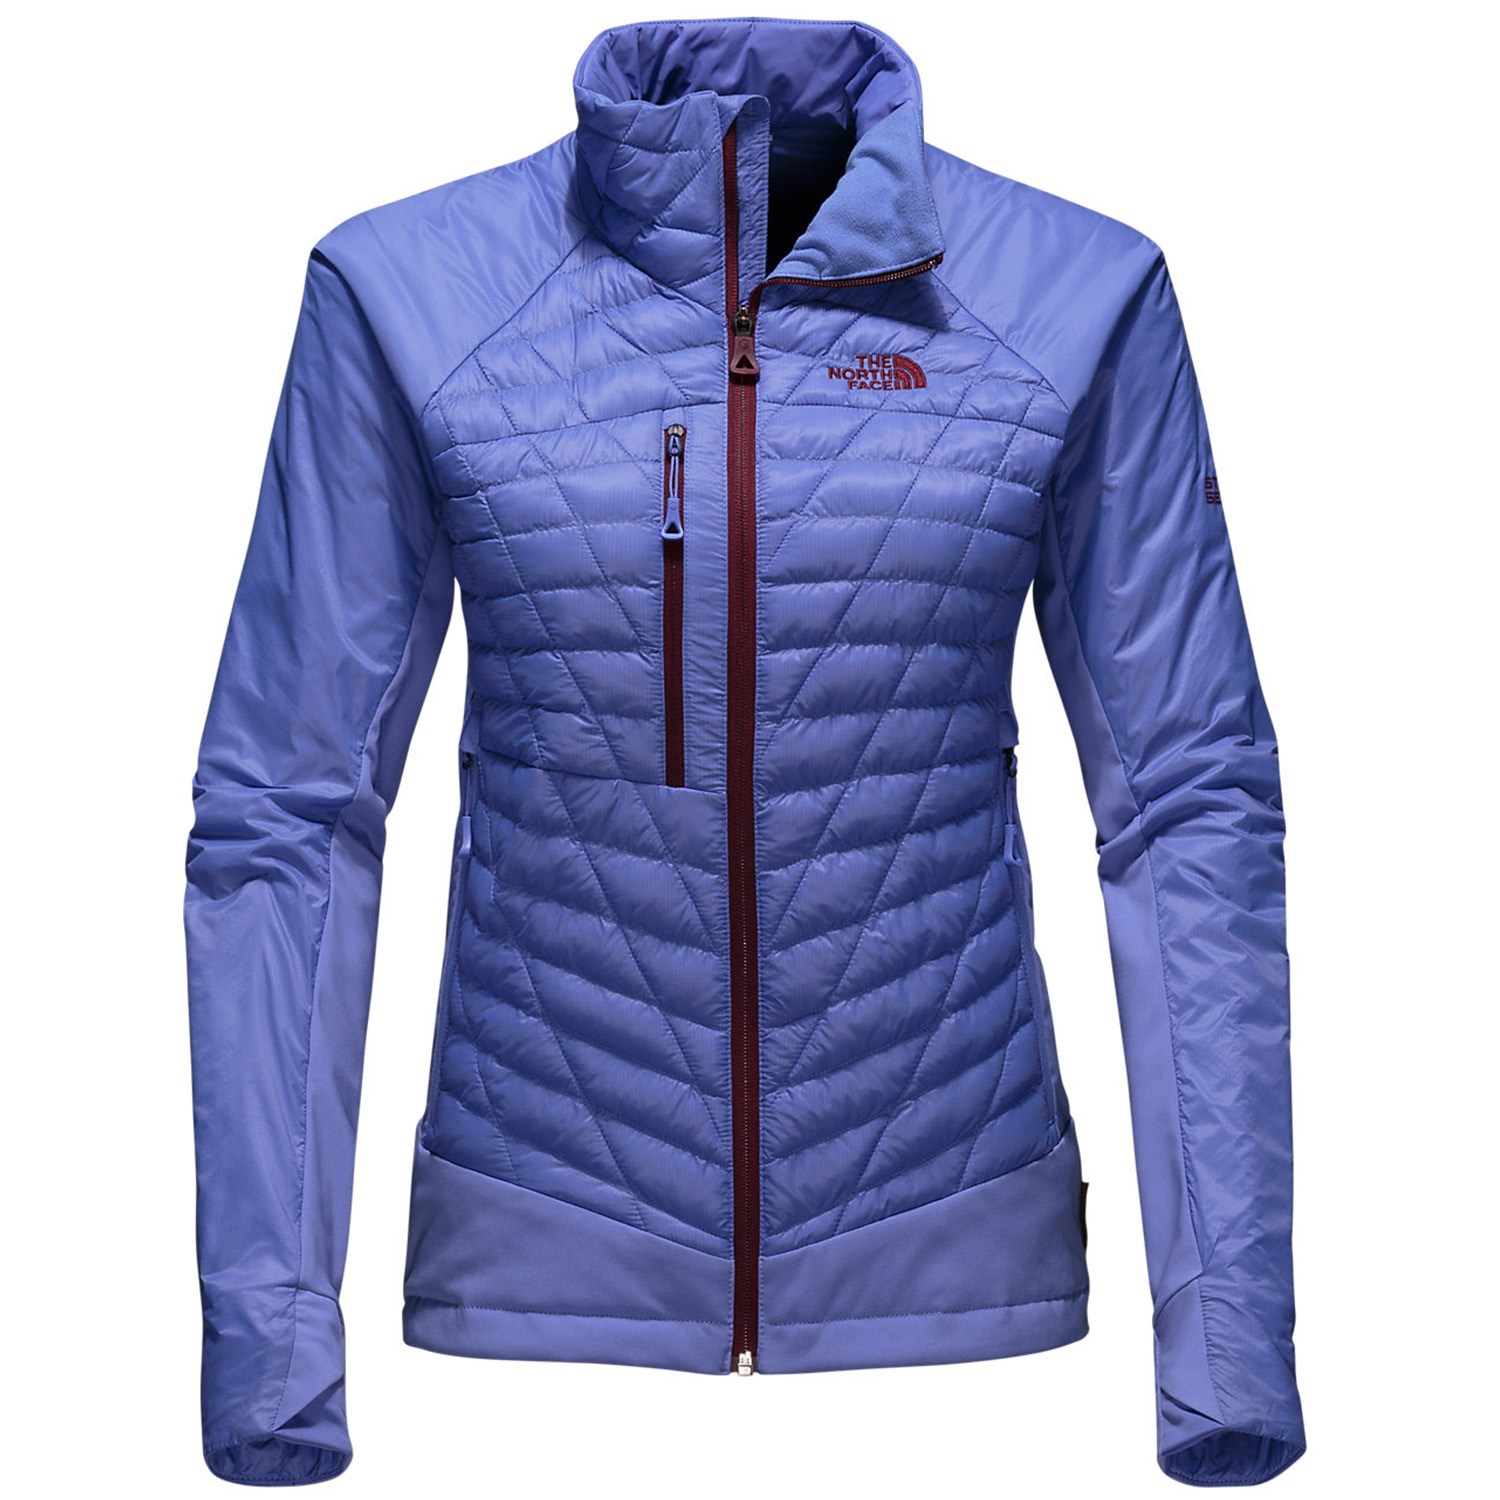 Spit behang schot The North Face Desolation ThermoBall™ Jacket - Women's | evo